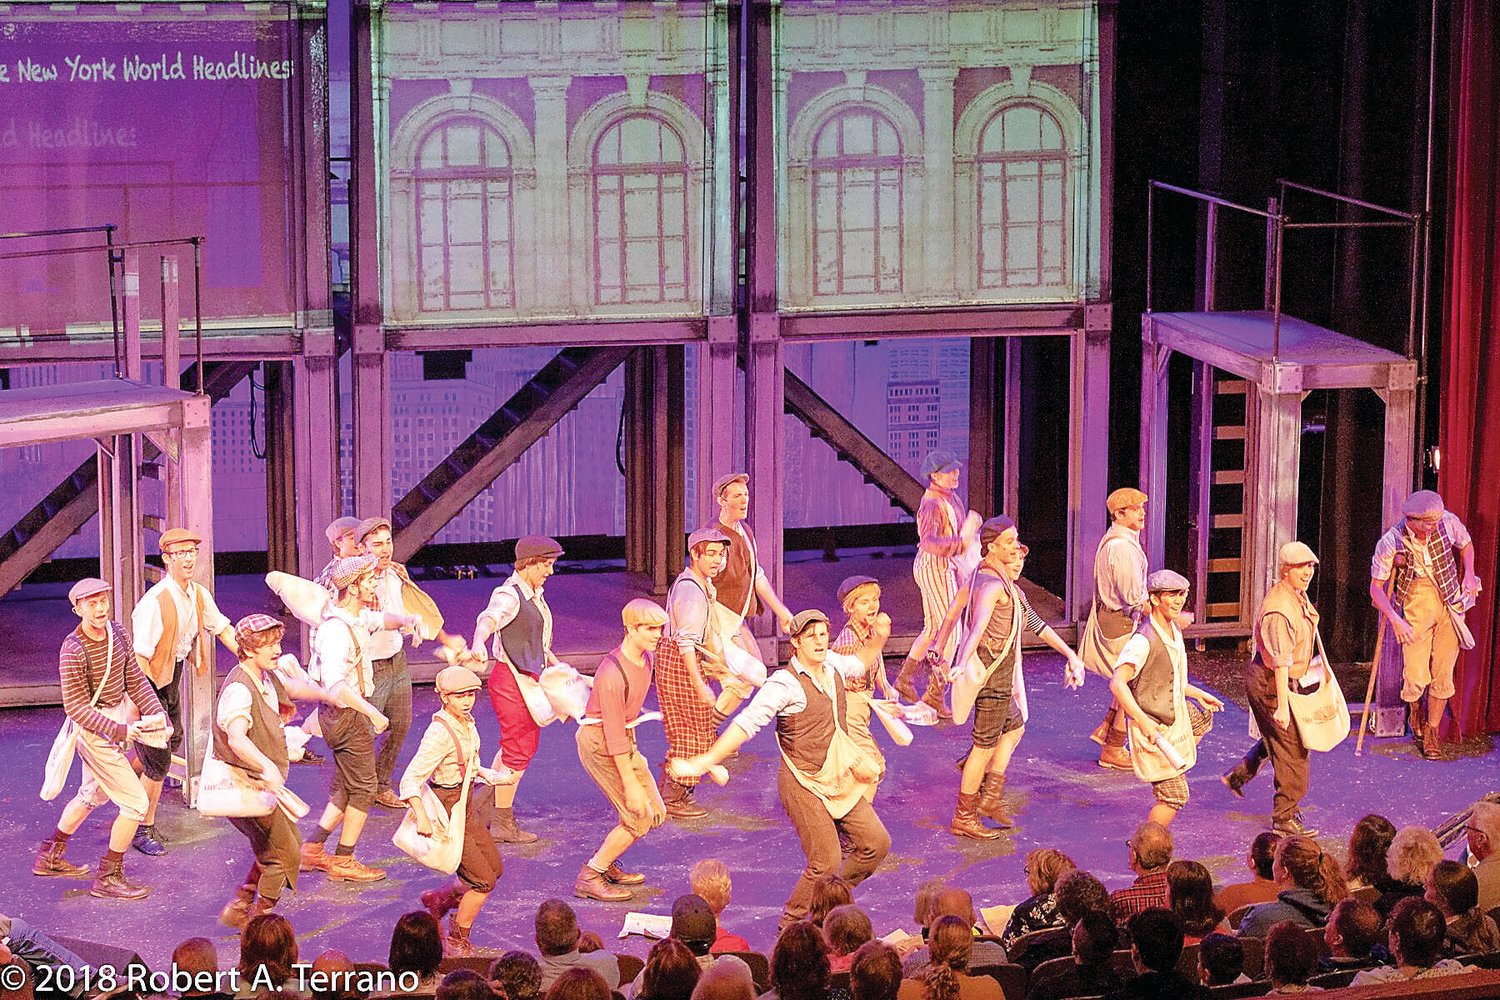 The cast of “Newsies” performs at the Kelsey Theatre at Mercer County Community College, 1200 Old Trenton Road, West Windsor, N.J. photo by Robert A. Terrano